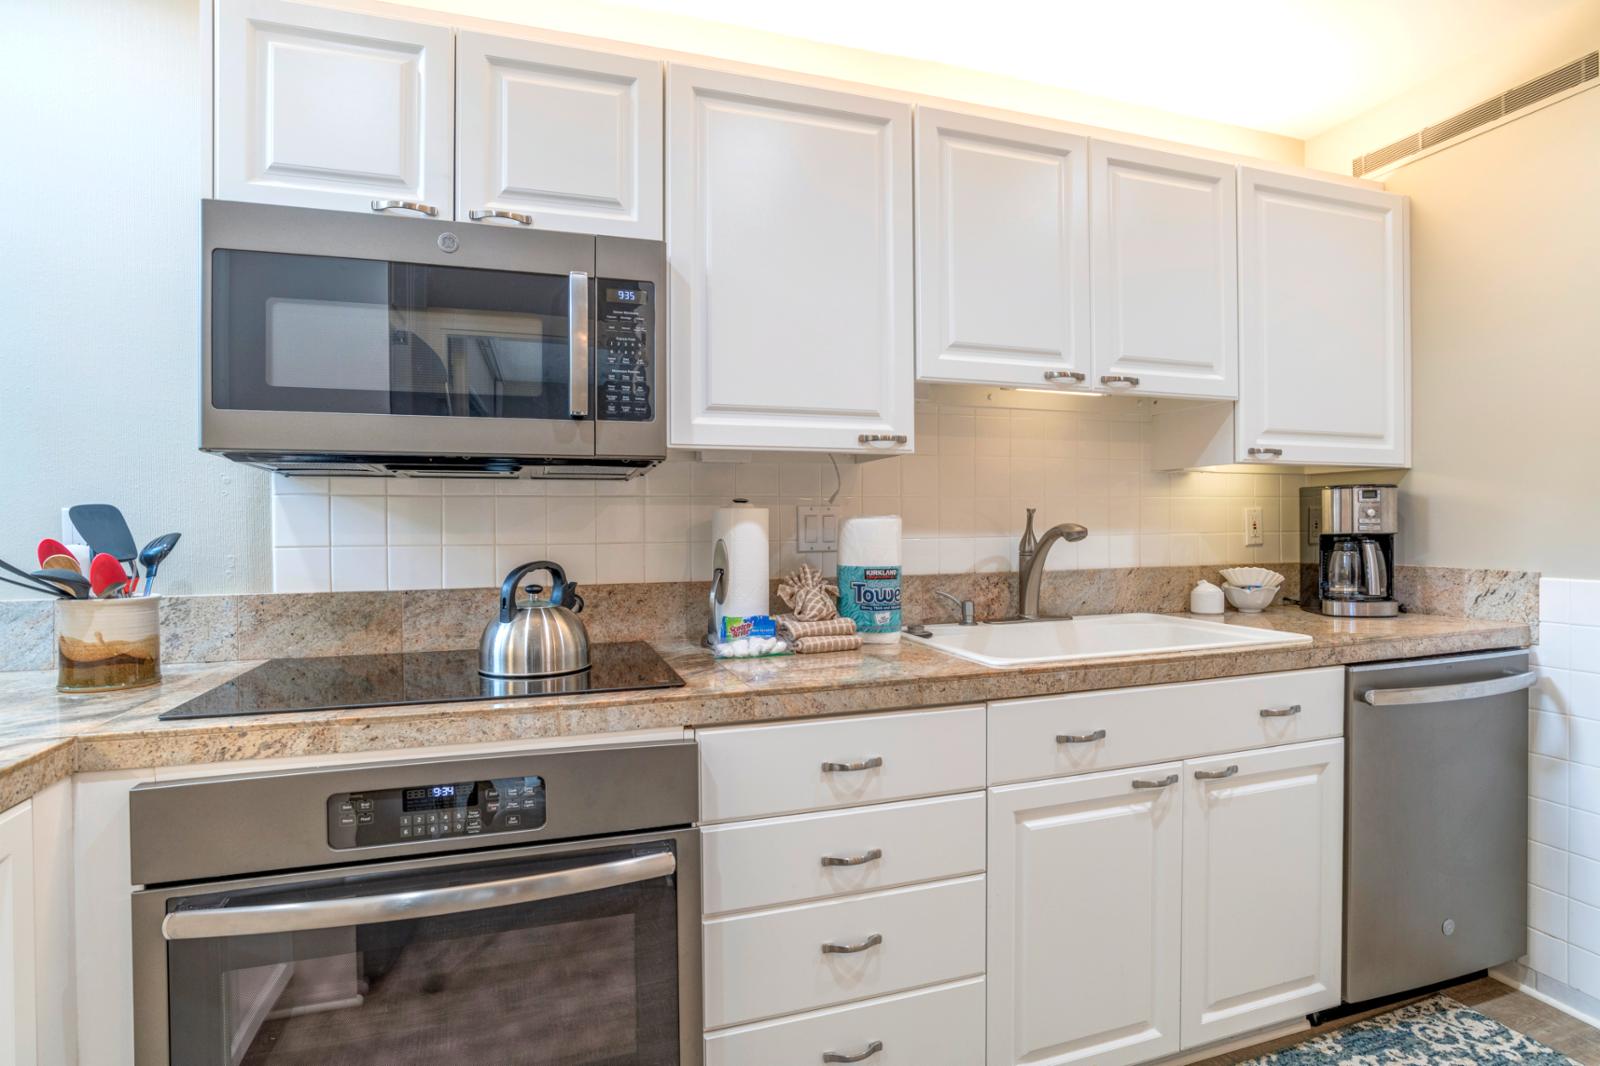 Updated stainless steel appliances and custom furnishings